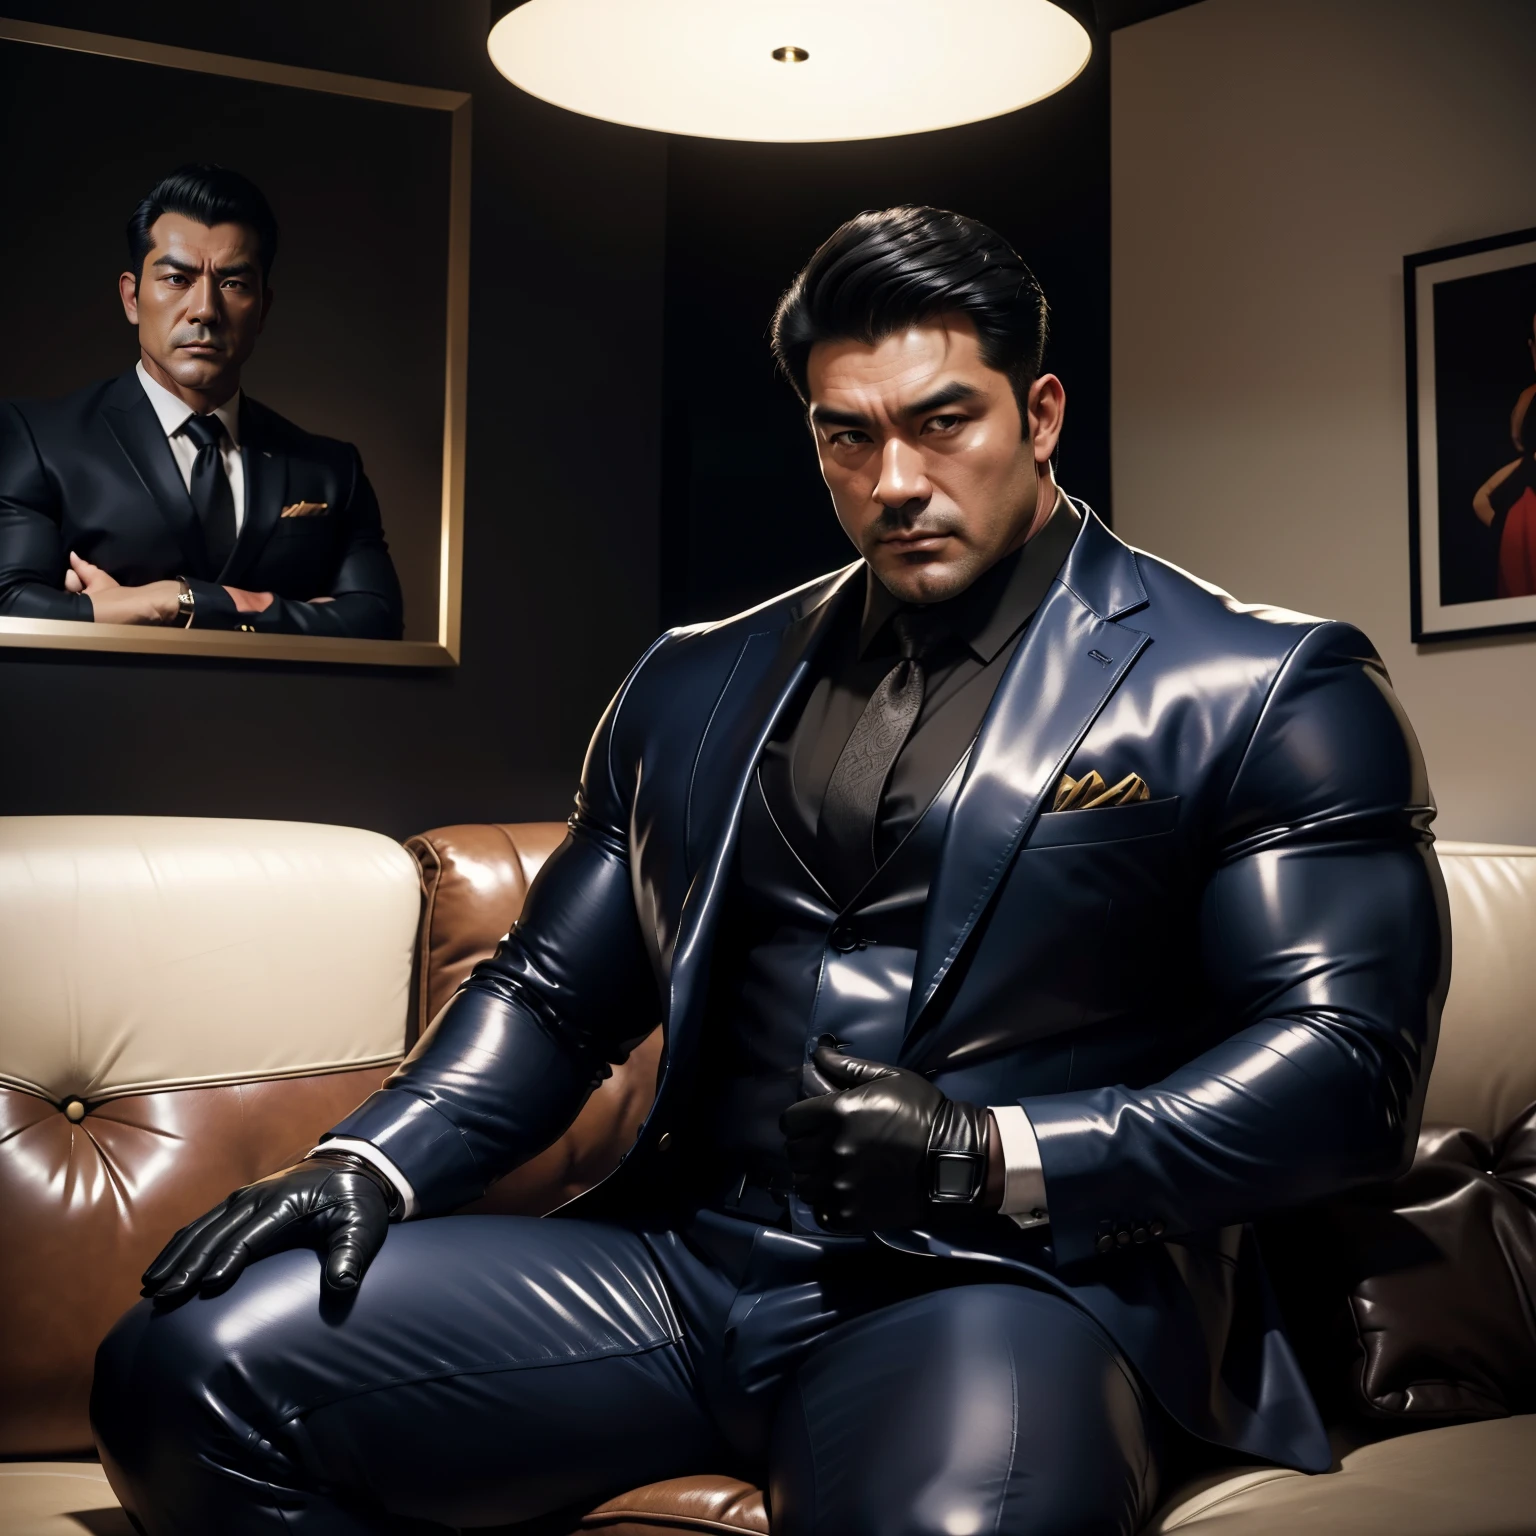 30 years old,daddy,"shiny suit ",Dad sat on sofa,k hd,in the office,"big muscle", gay ,black hair,asia face,masculine,strong man,the boss is,handsome,,leather gloves,lecherous dad,look straight ahead,dad is handsome,dad is handsome ,dad is "horny dad"